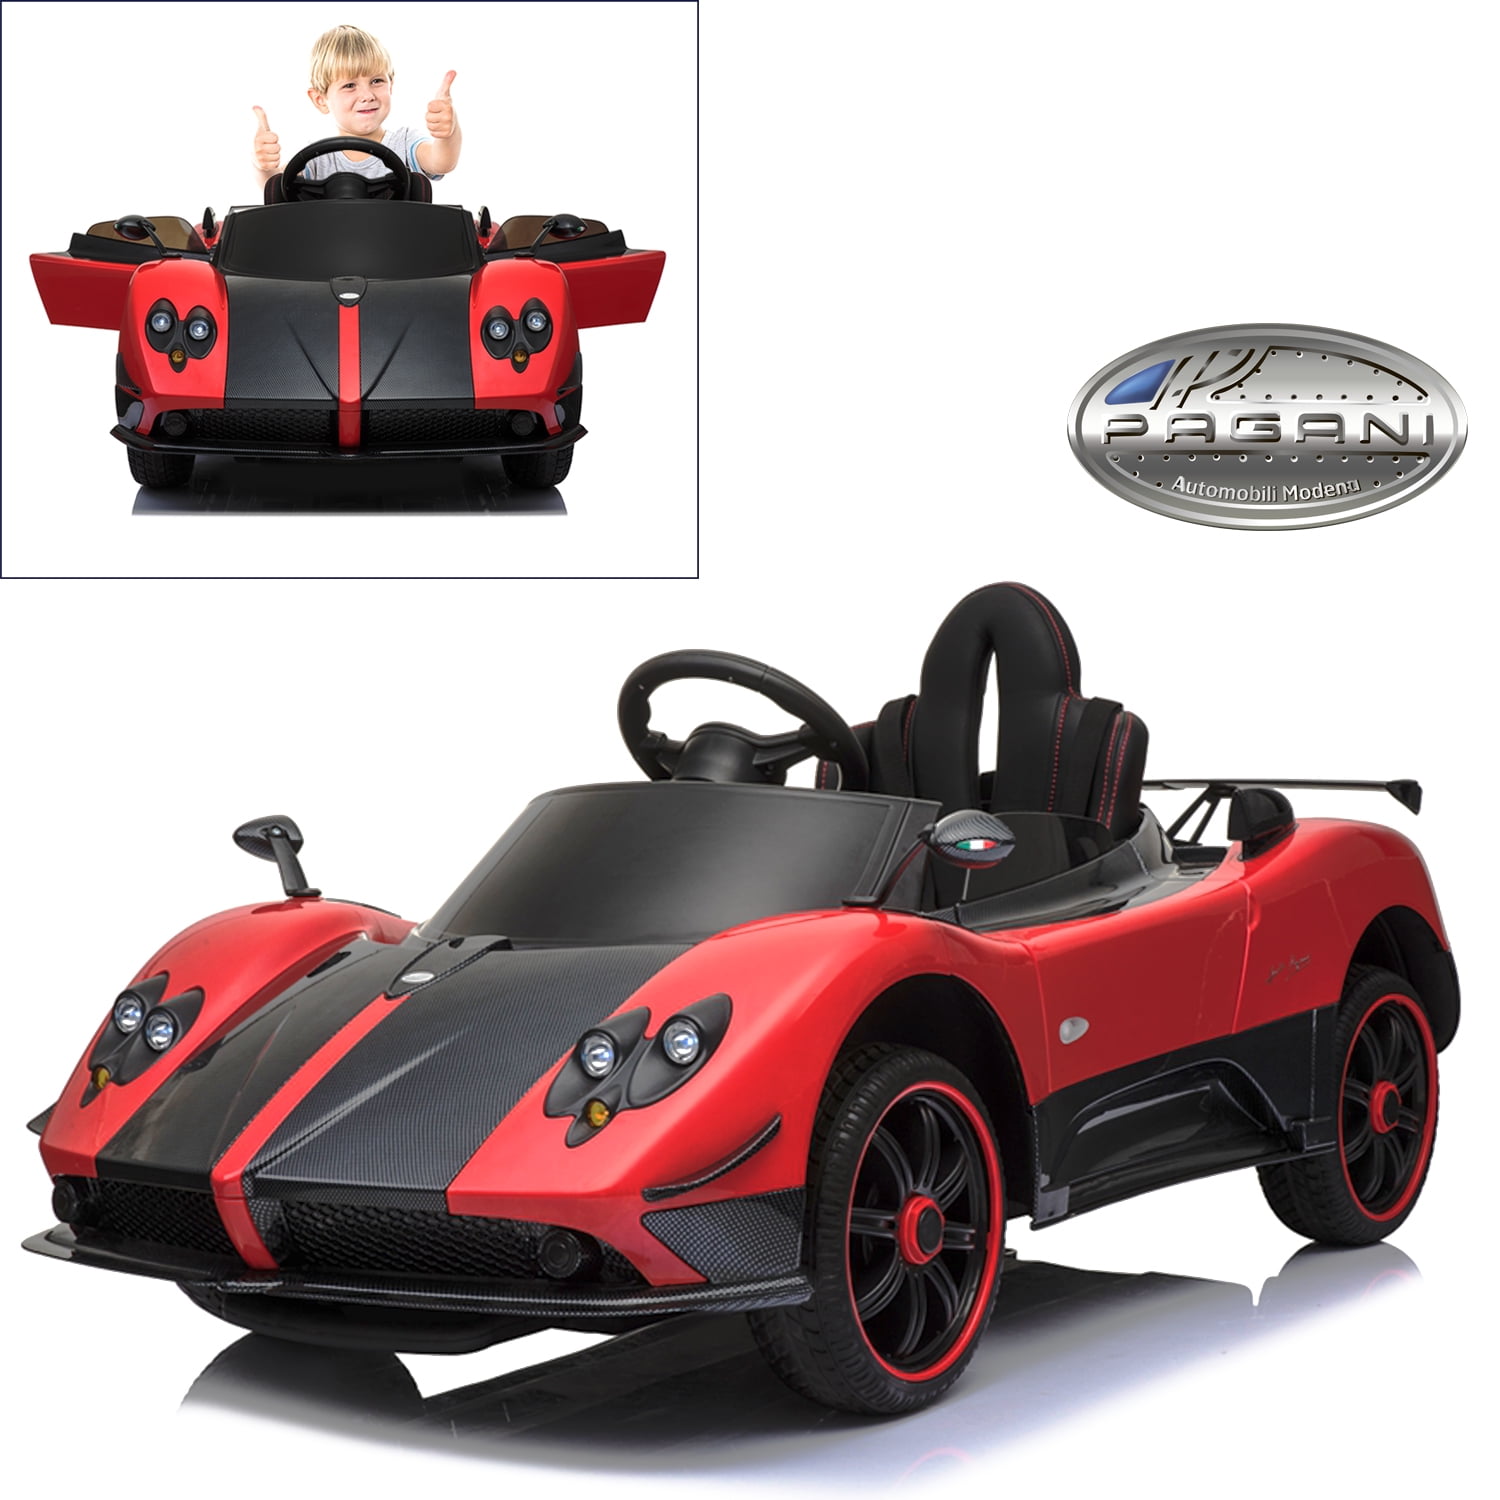 Pagani Zonda R Roadster Electric Ride On Car With Remote Control Power Seat For Kids 12v Power Battery Official Licensed Kid Car To Drive With 2 4g